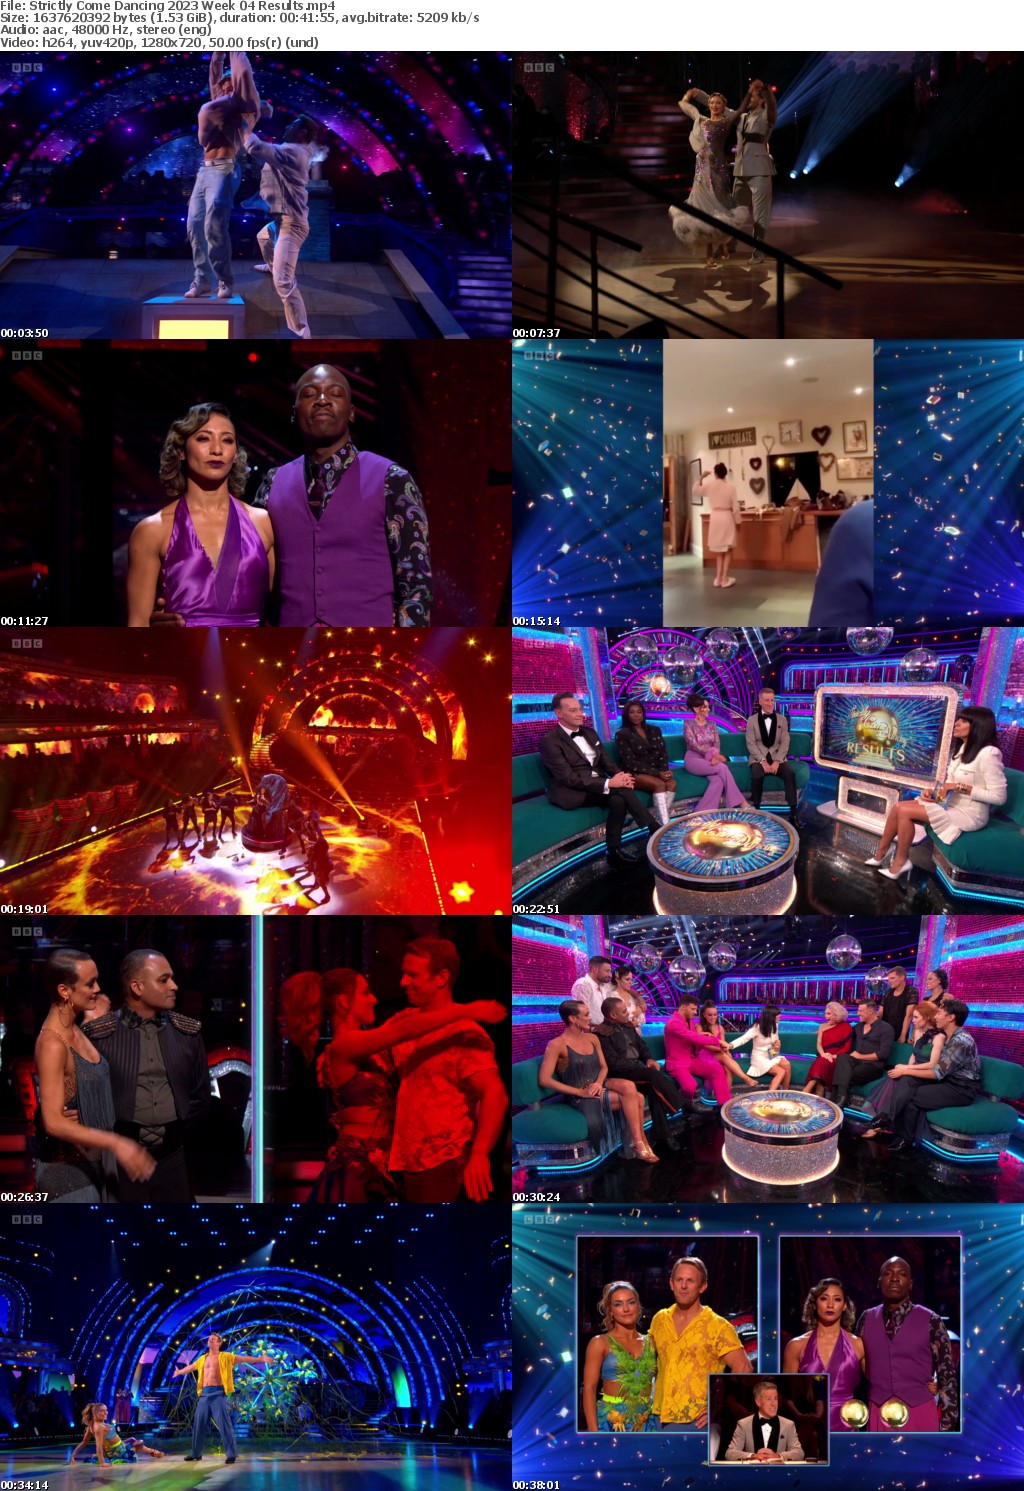 Strictly Come Dancing 2023 Week 04 Results (1280x720p HD, 50fps, soft Eng subs)